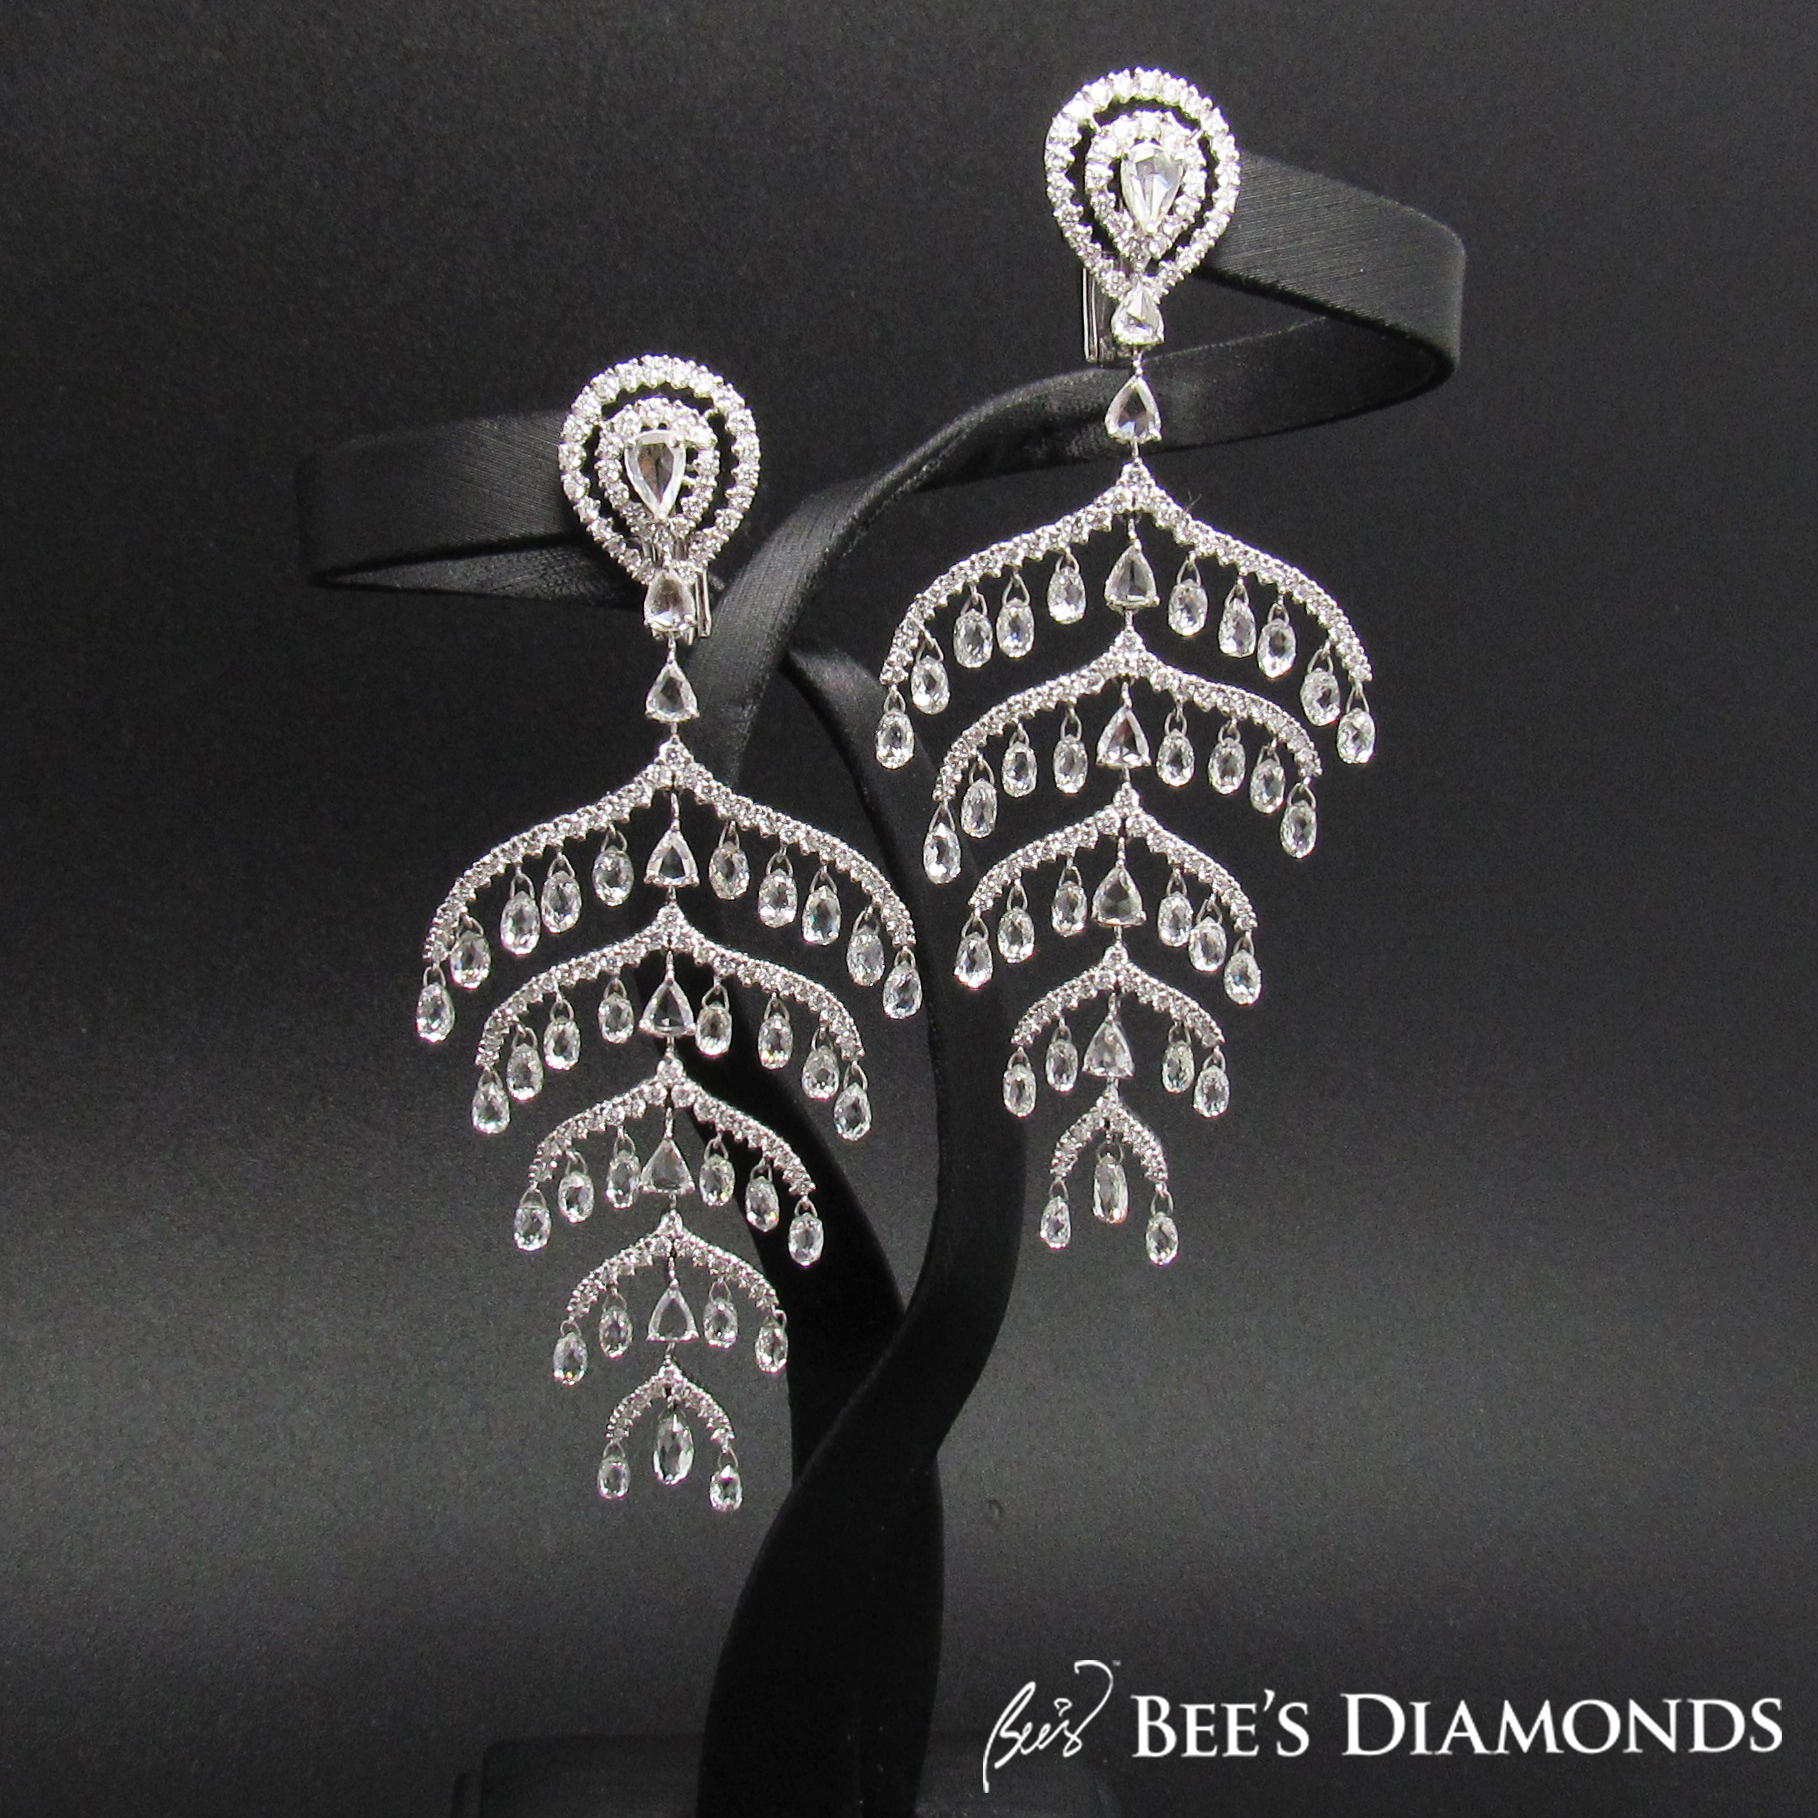 Earrings with small drops of briolette diamonds | Bee's Diamonds